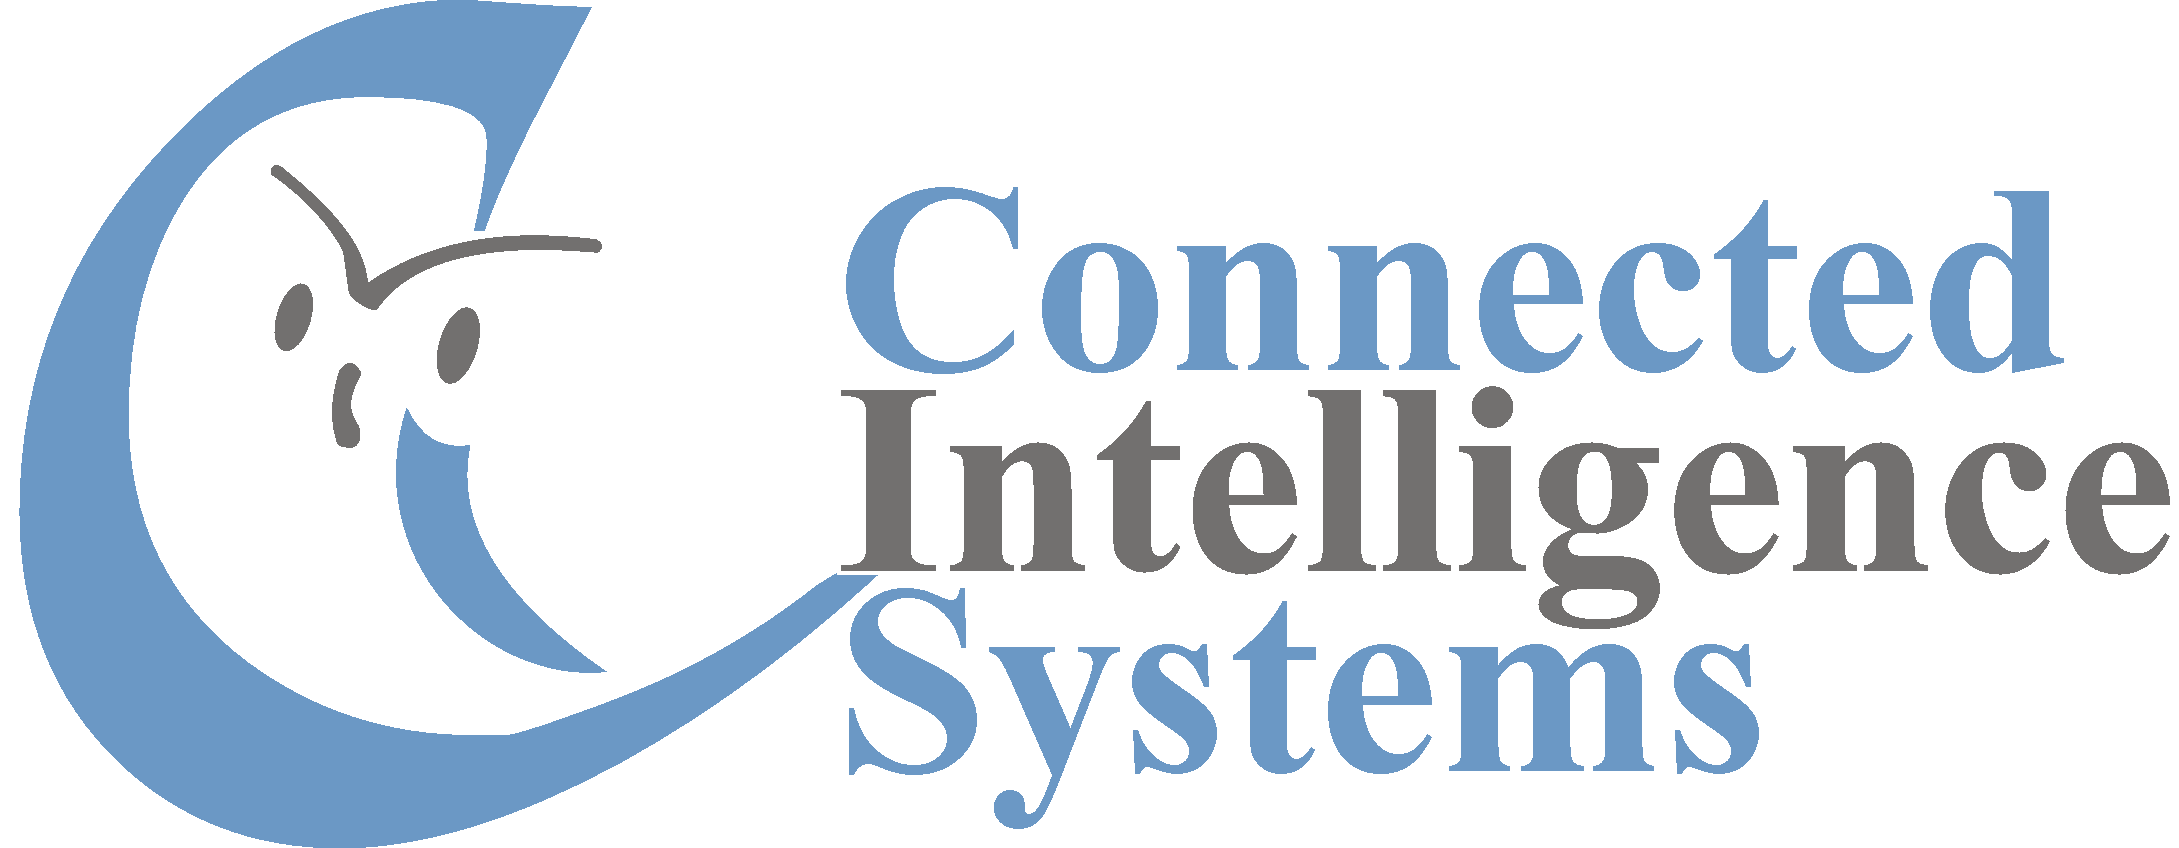 Connected Intelligence Systems